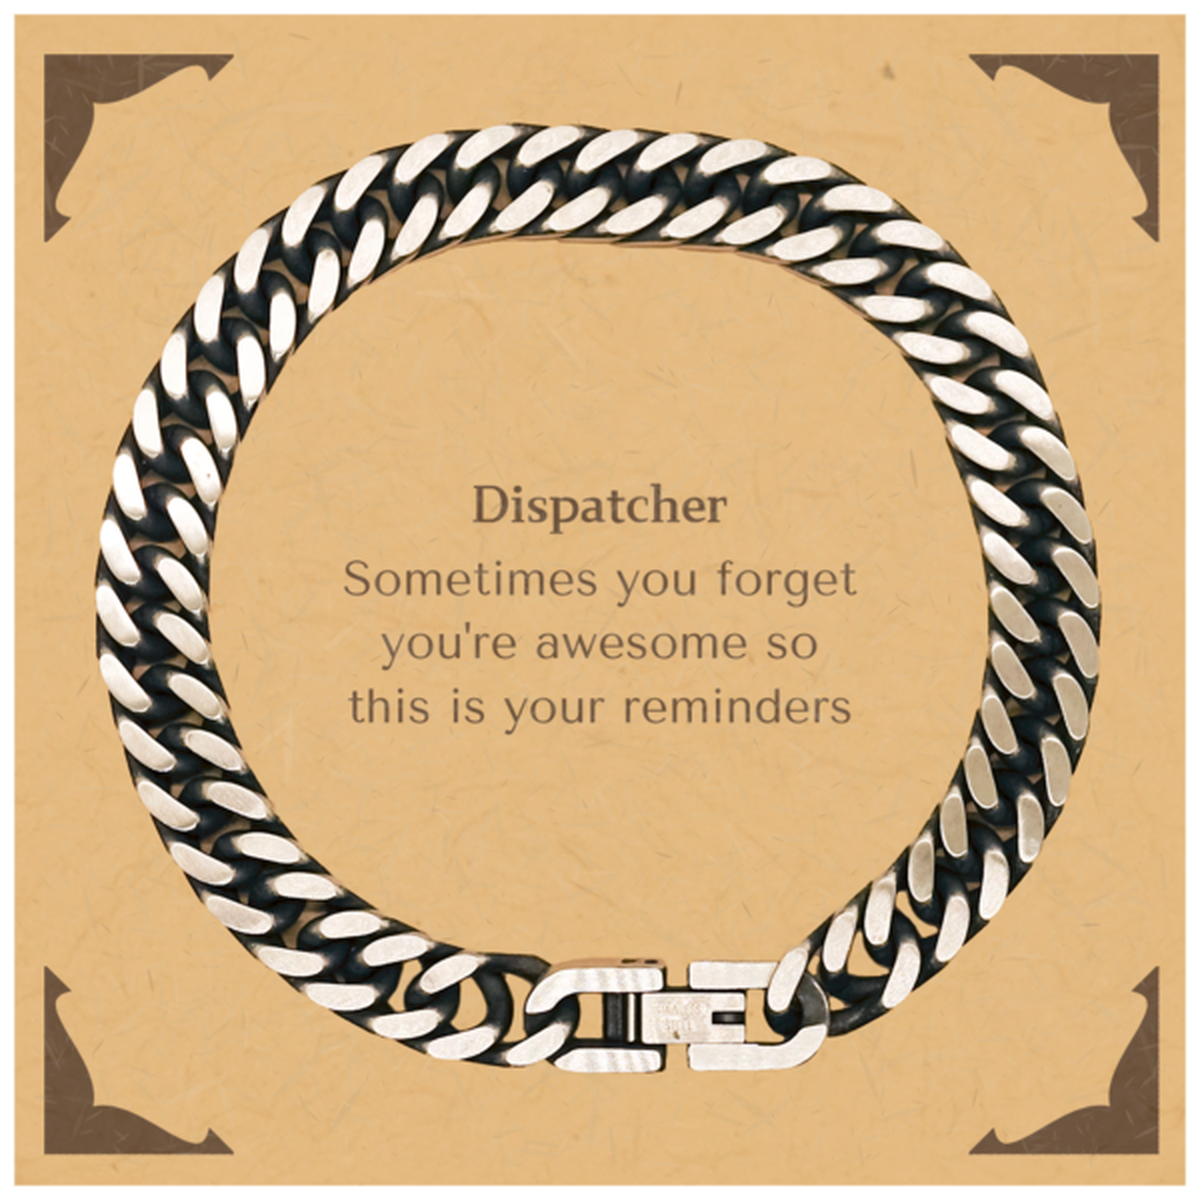 Sentimental Dispatcher Cuban Link Chain Bracelet, Dispatcher Sometimes you forget you're awesome so this is your reminders, Graduation Christmas Birthday Gifts for Dispatcher, Men, Women, Coworkers